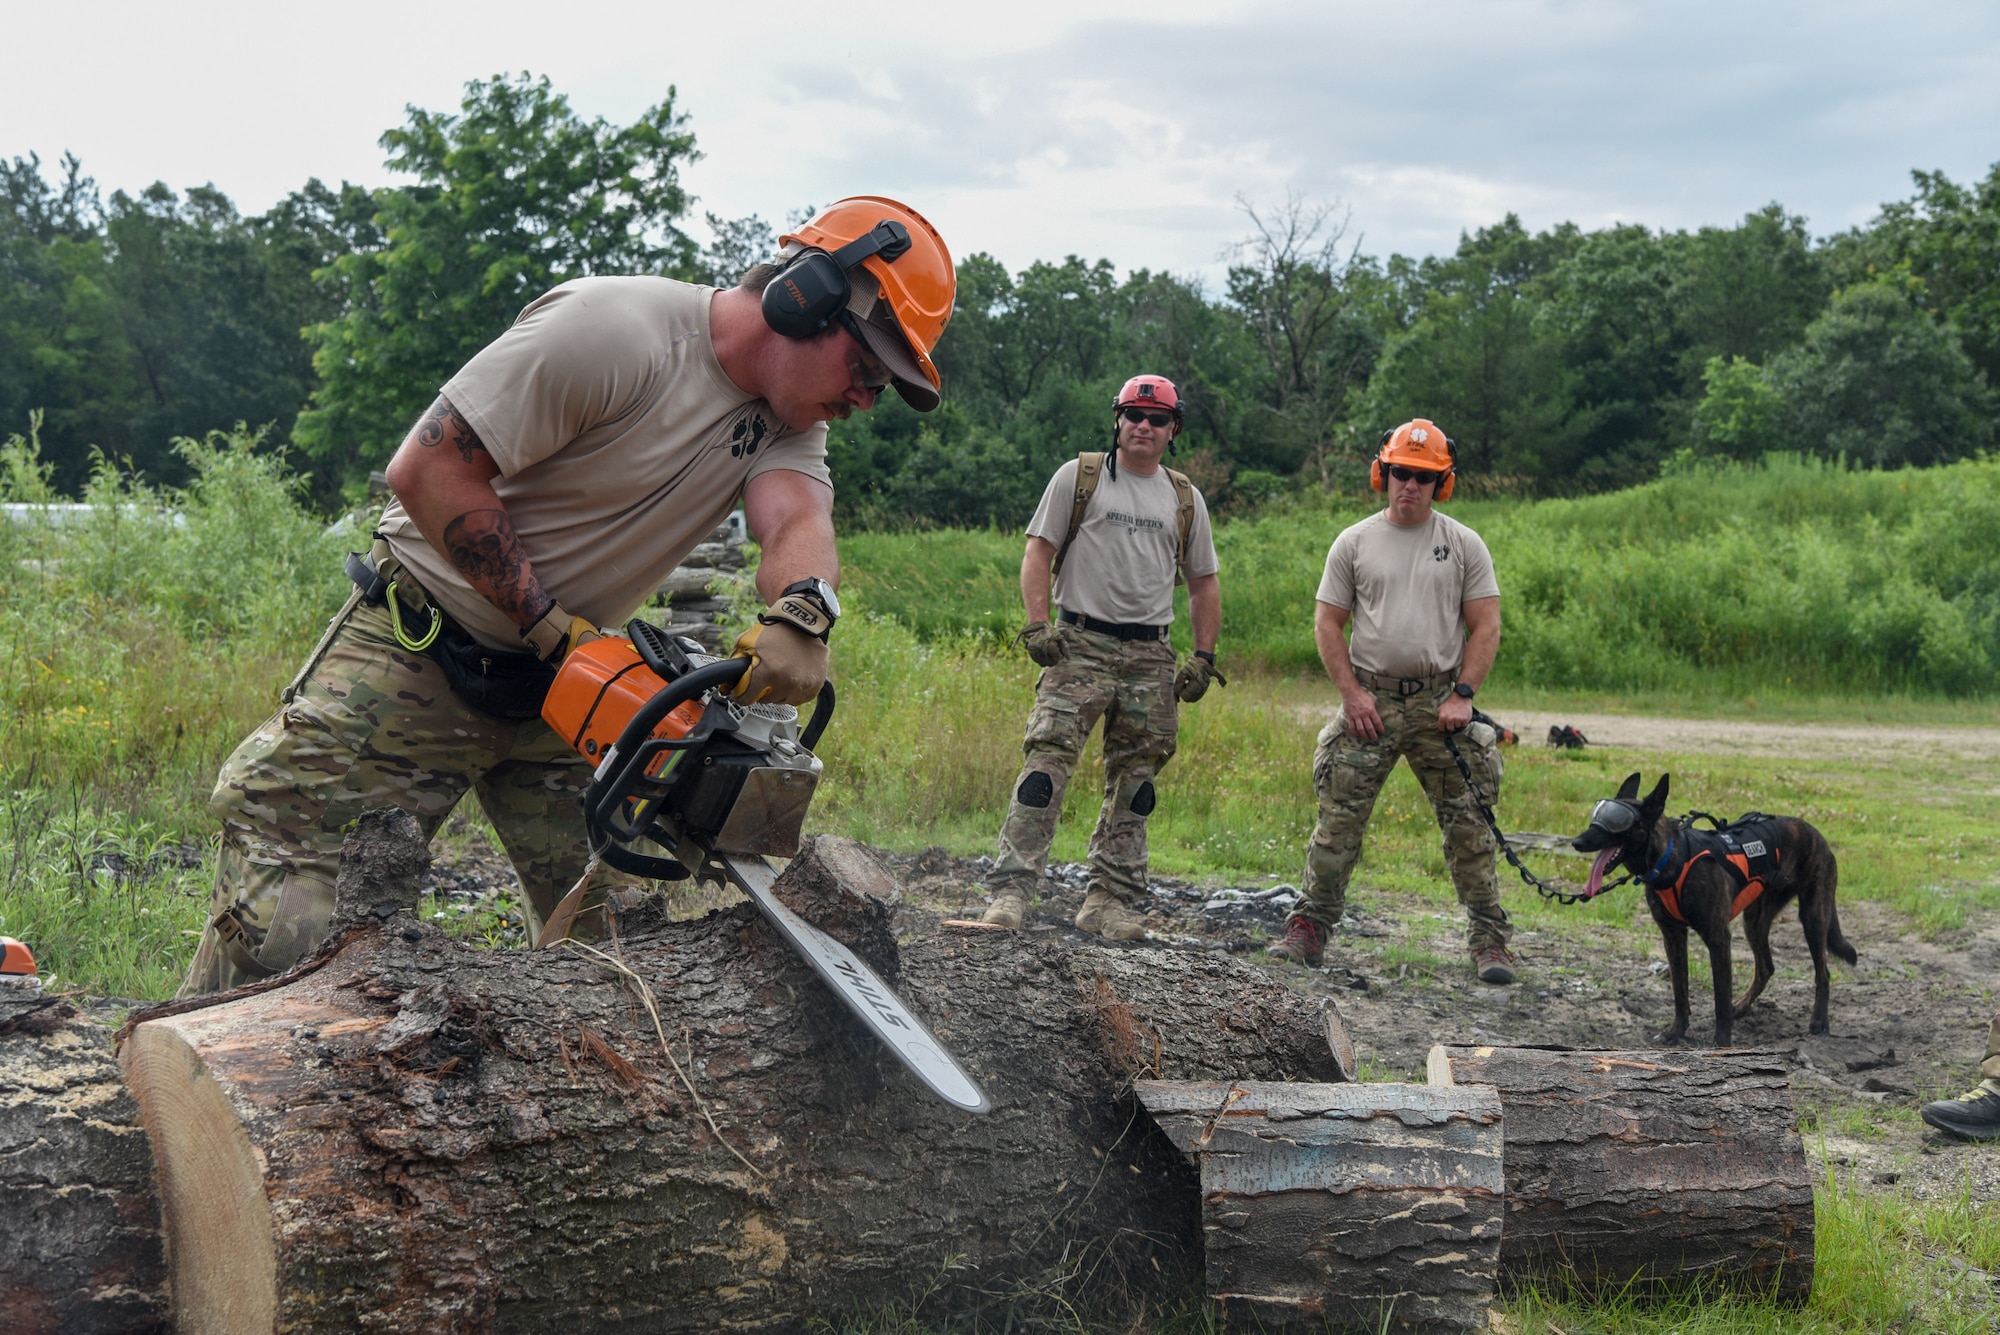 Master Sgt. Rudy Parsons, a pararescueman with the Kentucky Air National Guard’s 123rd Special Tactics Squadron, and Callie, his search and rescue dog, participate in Patriot North, an annual domestic operations exercise designed to provide natural disaster-response training at Volk Field, Wis., July 15, 2019. Callie is currently the only search and rescue dog in the Department of Defense. (U.S. Air National Guard photo by Staff Sgt. Joshua Horton